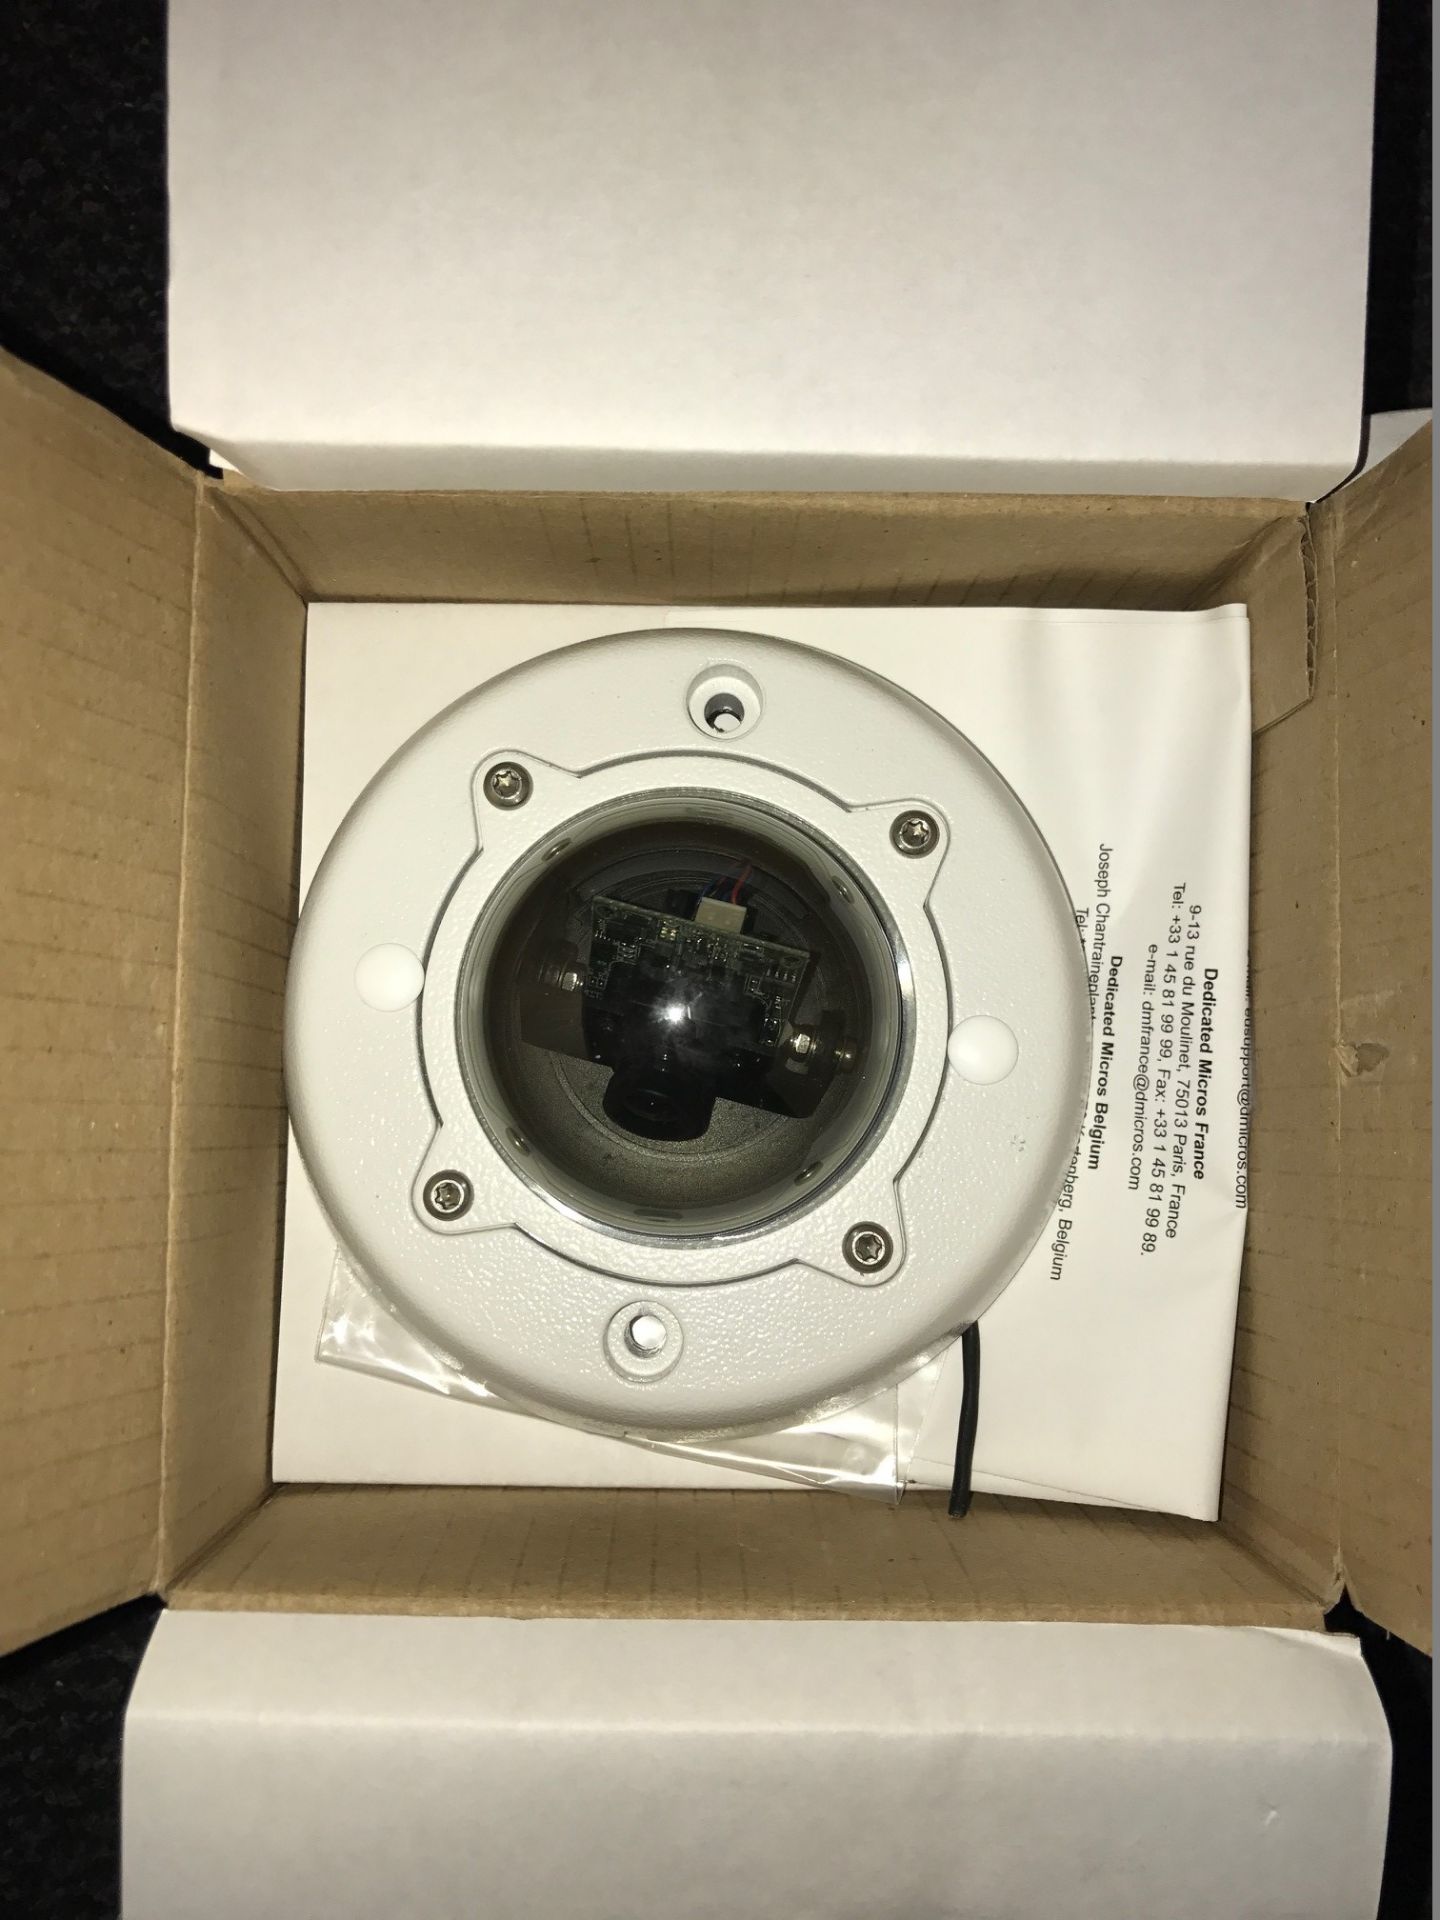 4 x Dedicated Micros DM/1000-103 Dome Cameras Med Res Colour 3.6mm Lens/Smoked Hemisphere (Brand New